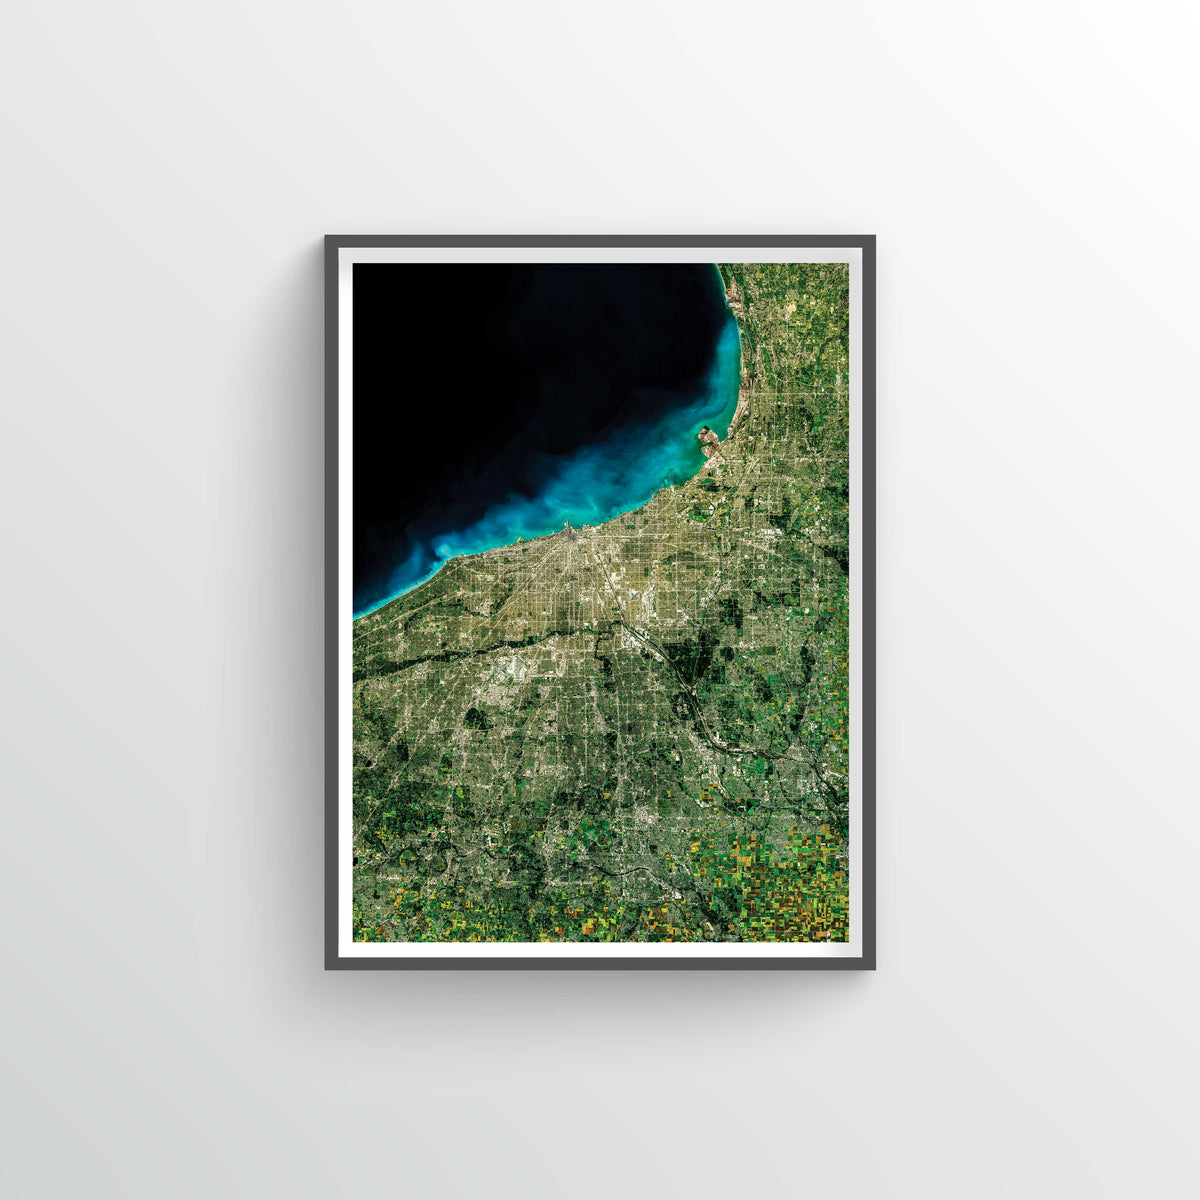 Chicago Earth Photography - Art Print